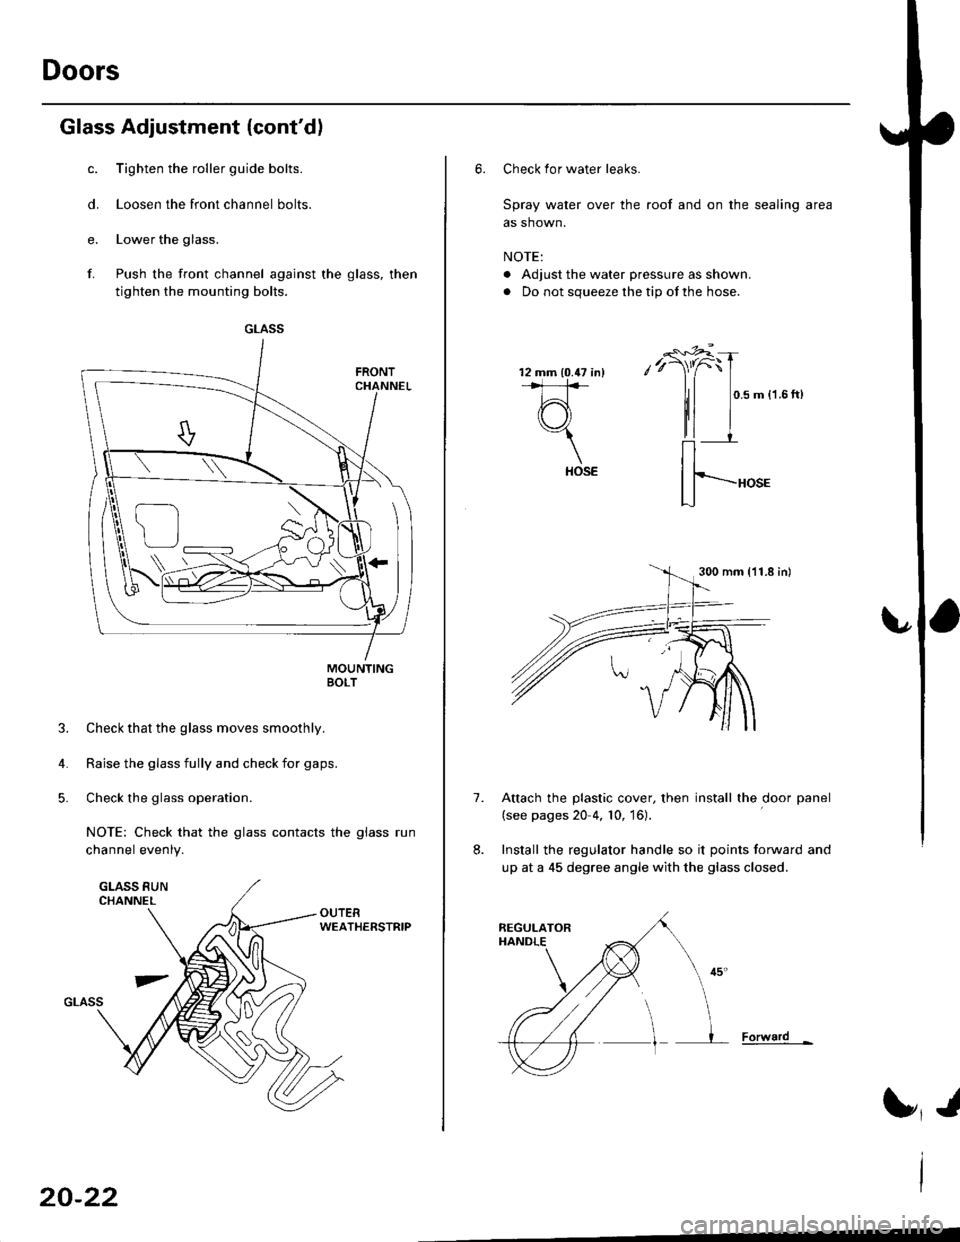 HONDA CIVIC 2000 6.G Workshop Manual Doors
Glass Adjustment {contd)
c. Tighten the roller guide bolts.
d. Loosen the front channel bolts.
e. Lower the glass.
f. Push the front channel against the glass, then
tighten the mounting bolts.
